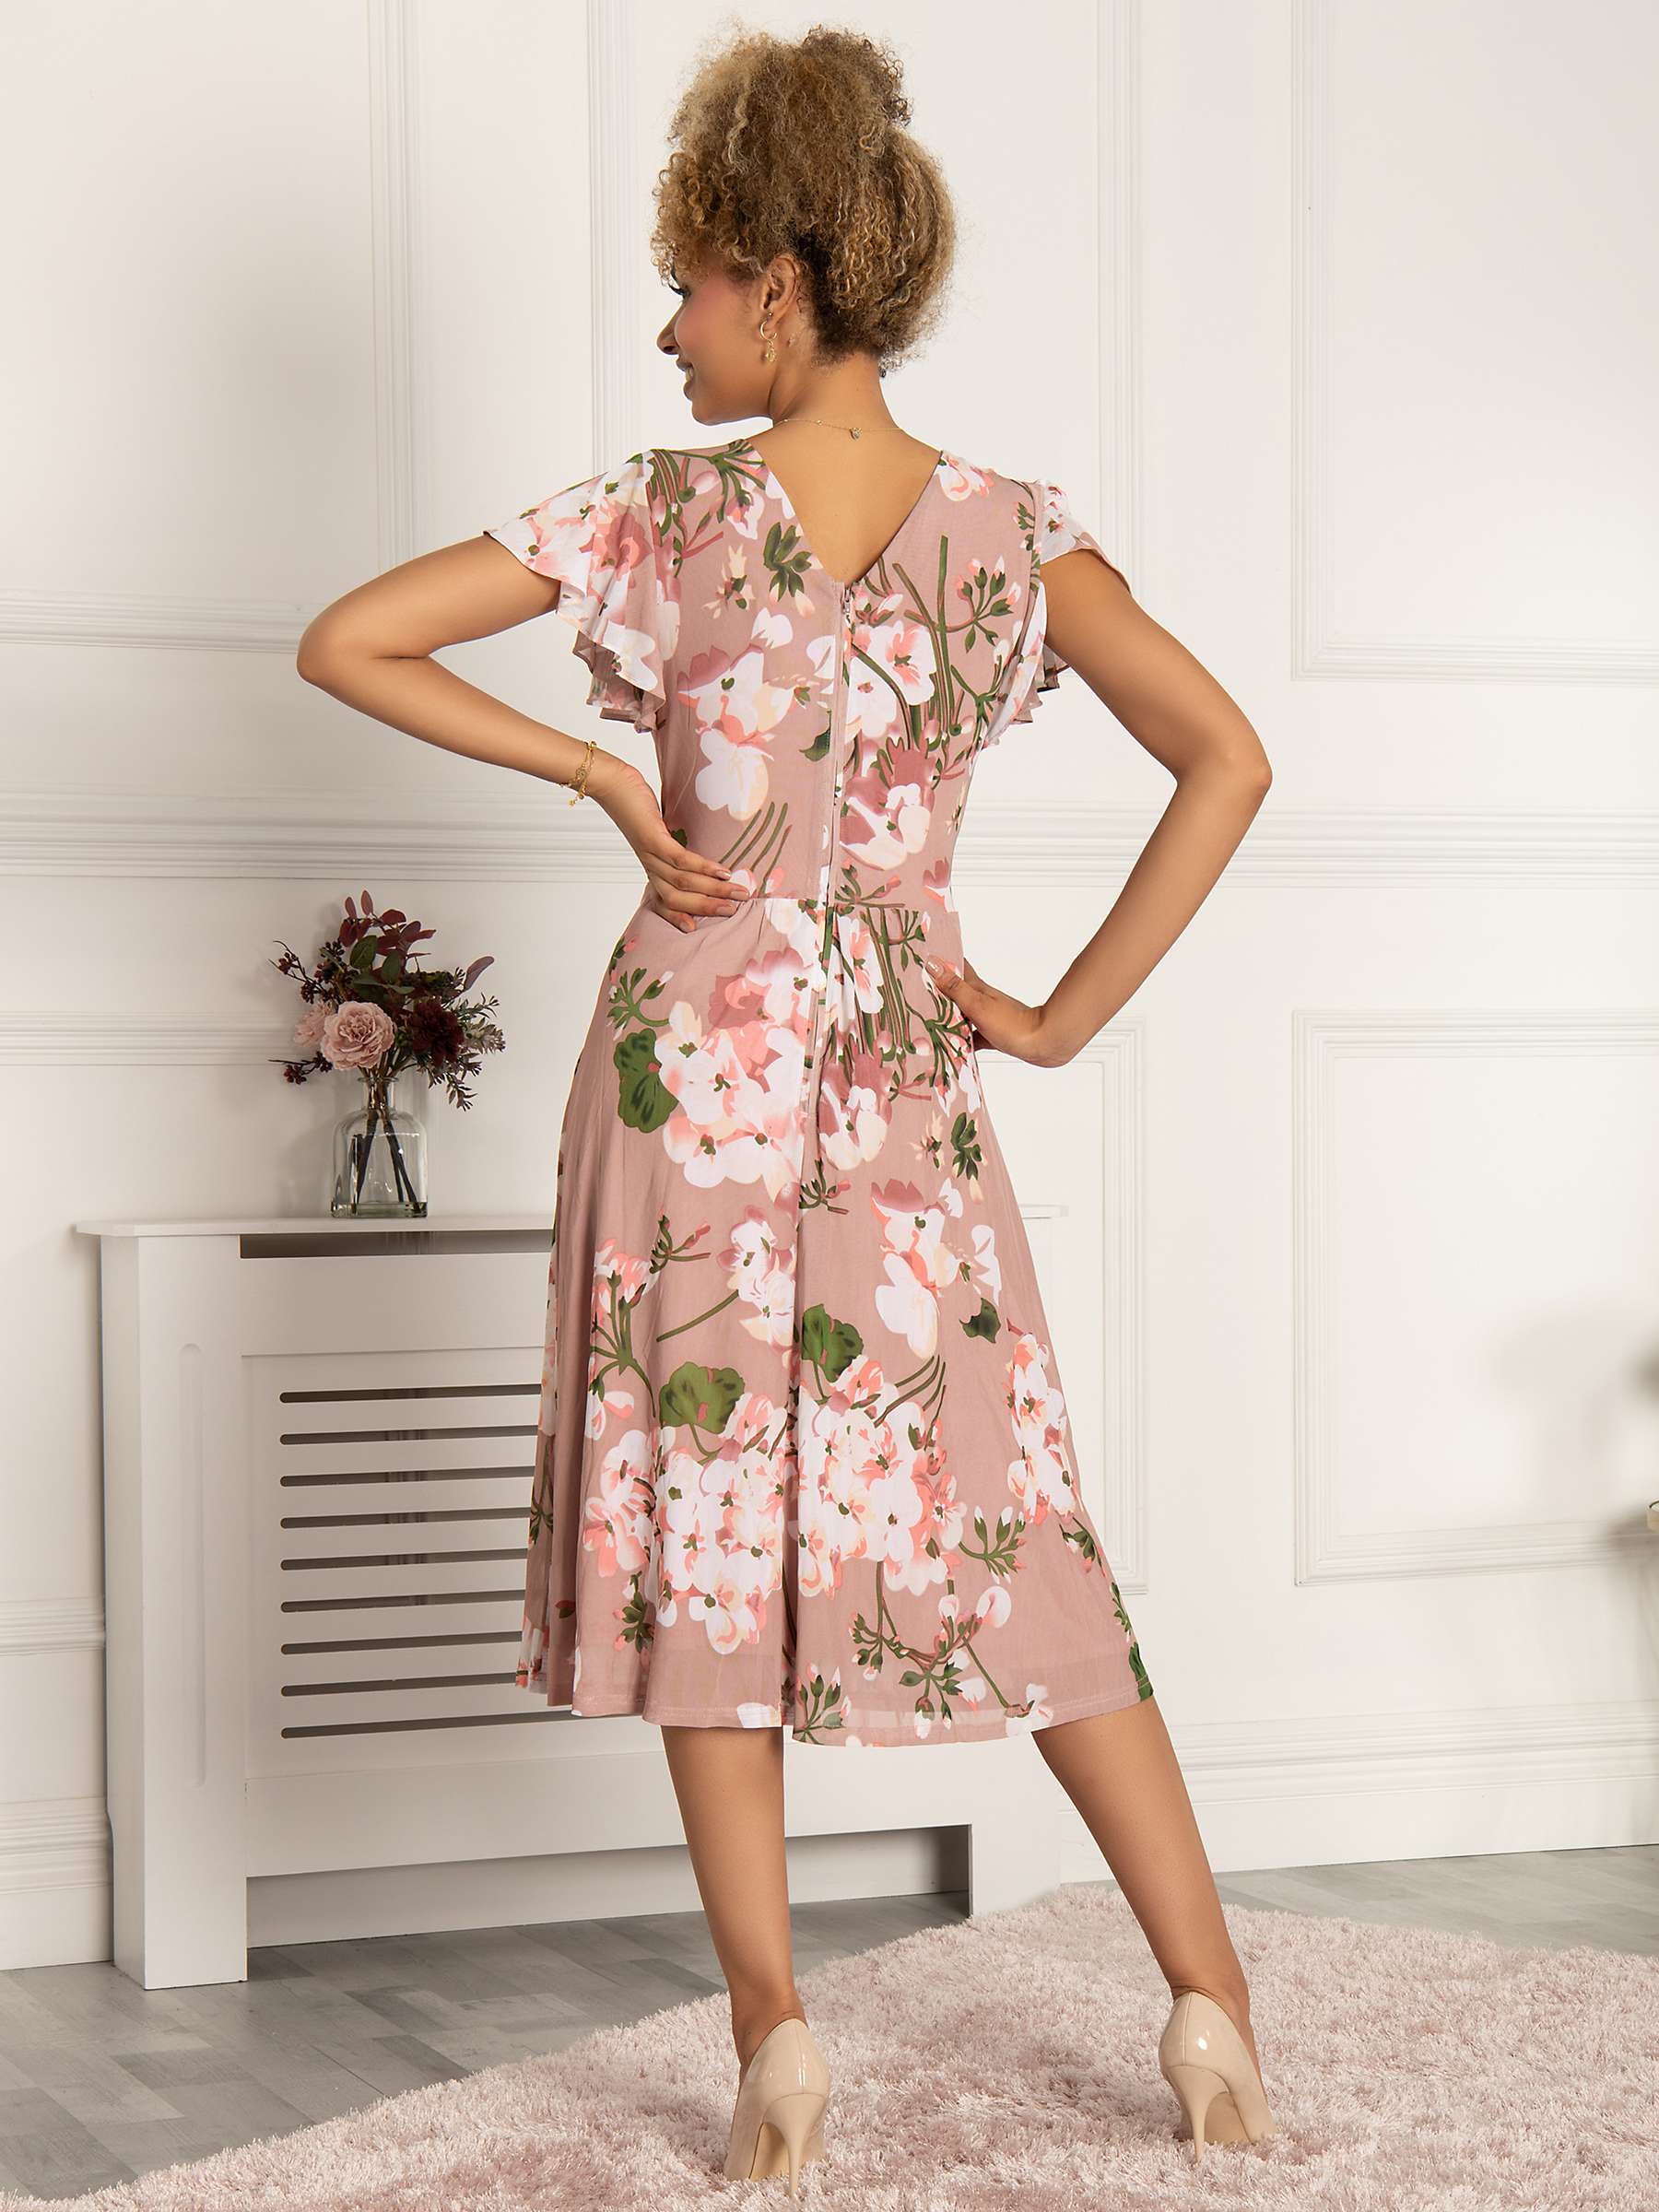 Buy Jolie Moi Chailee Floral Mesh Midi Dress, Dusty Pink Online at johnlewis.com